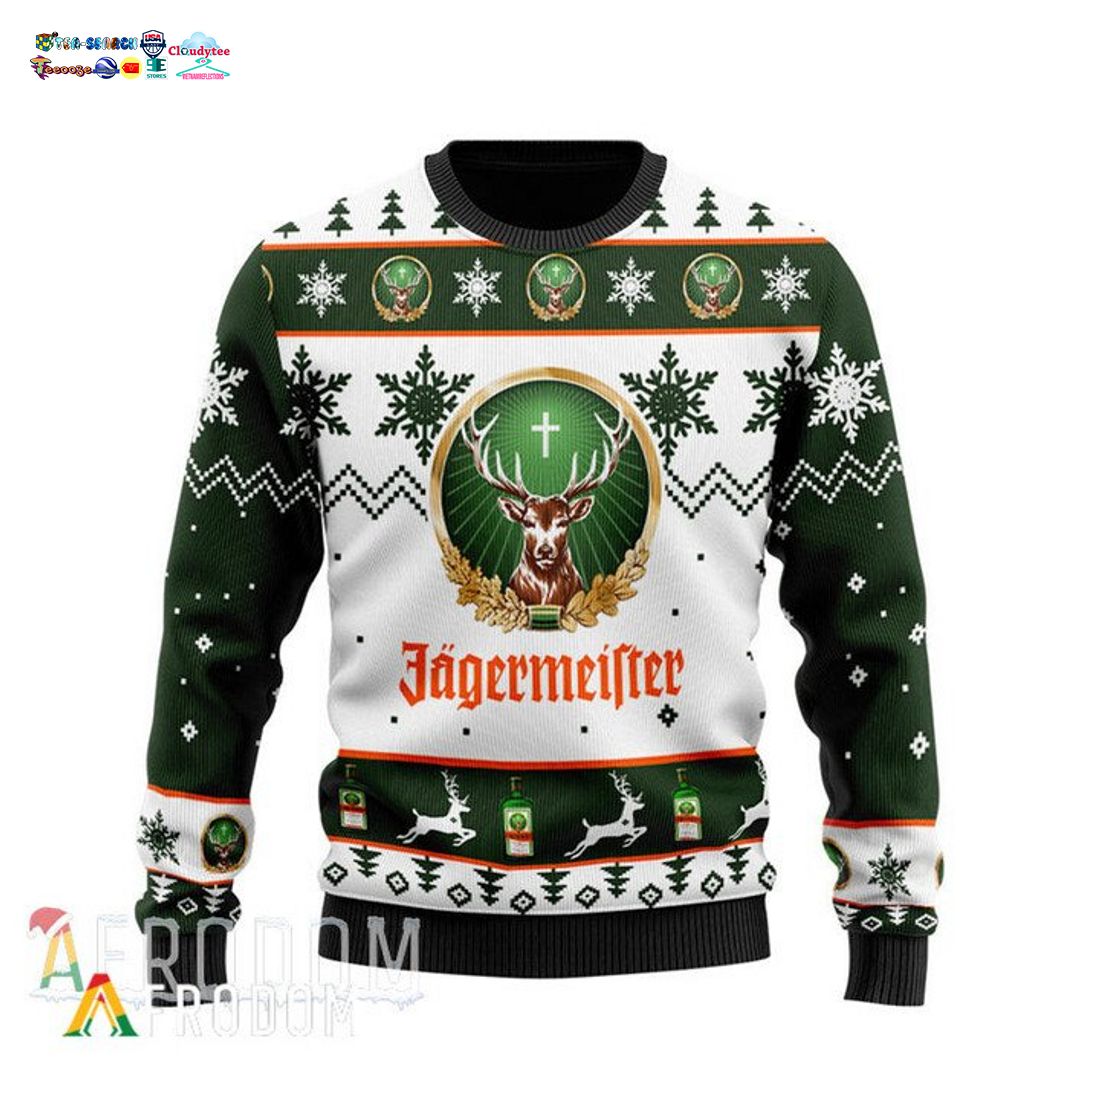 Jagermeister Ver 2 Ugly Christmas Sweater